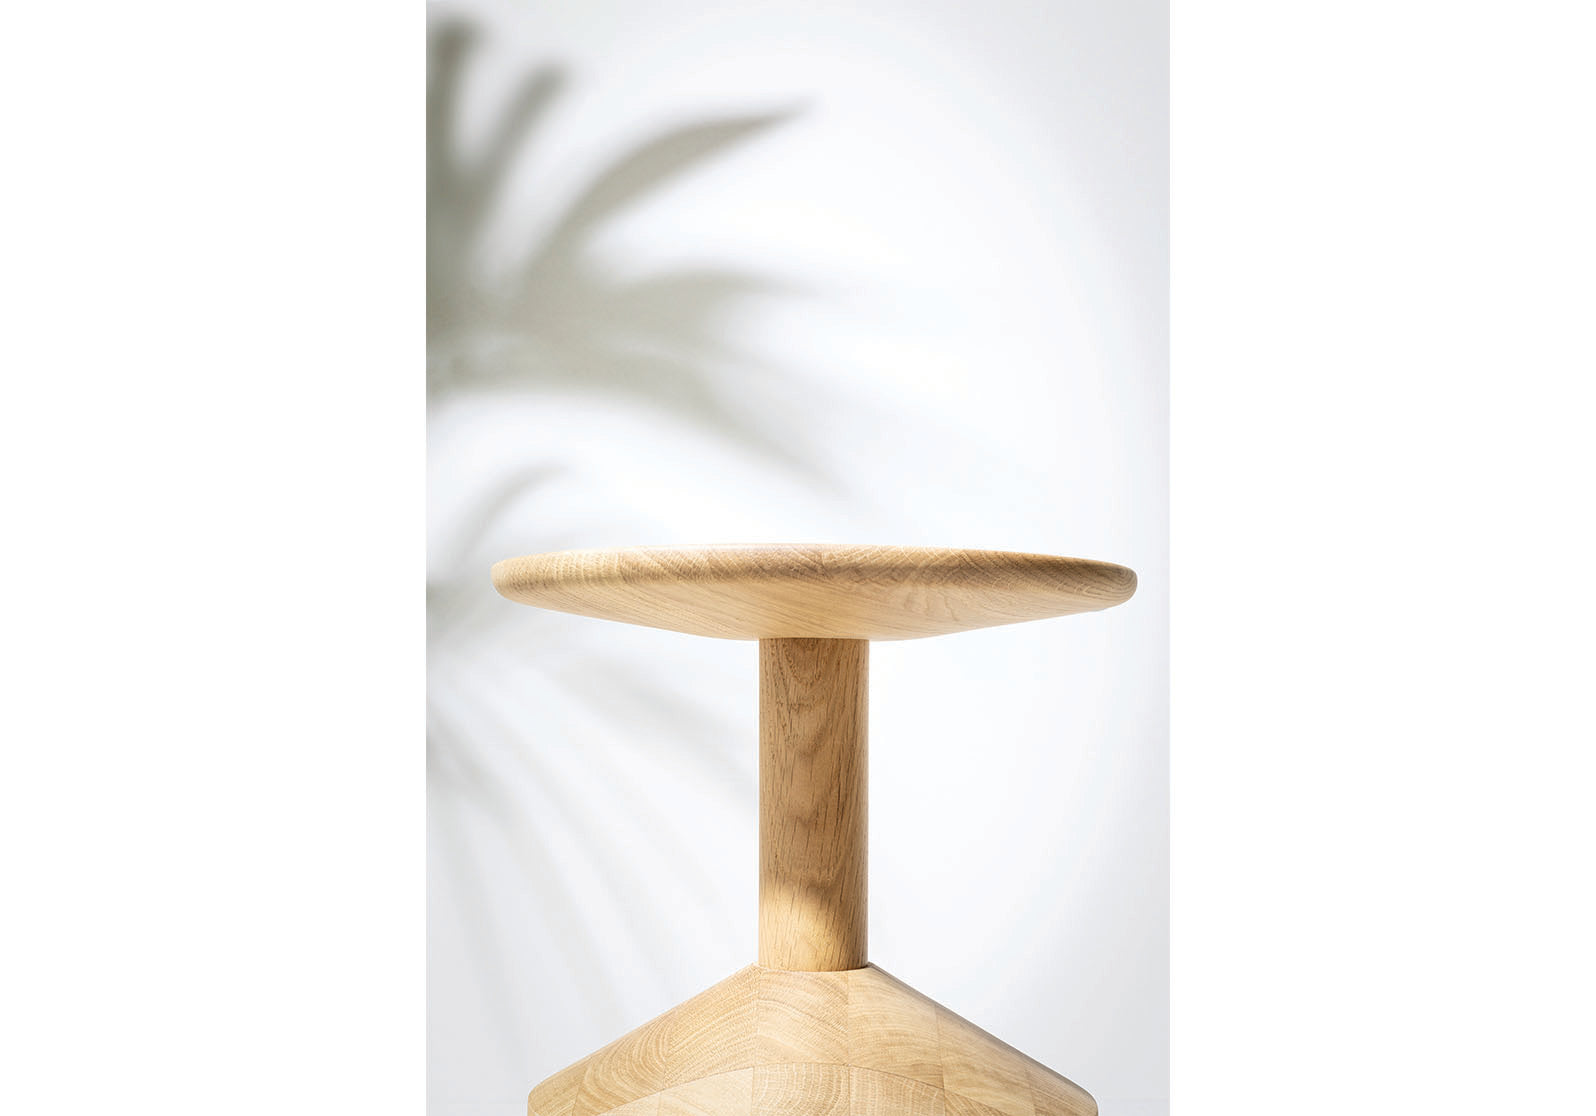 Pezzo Side Table / Stool